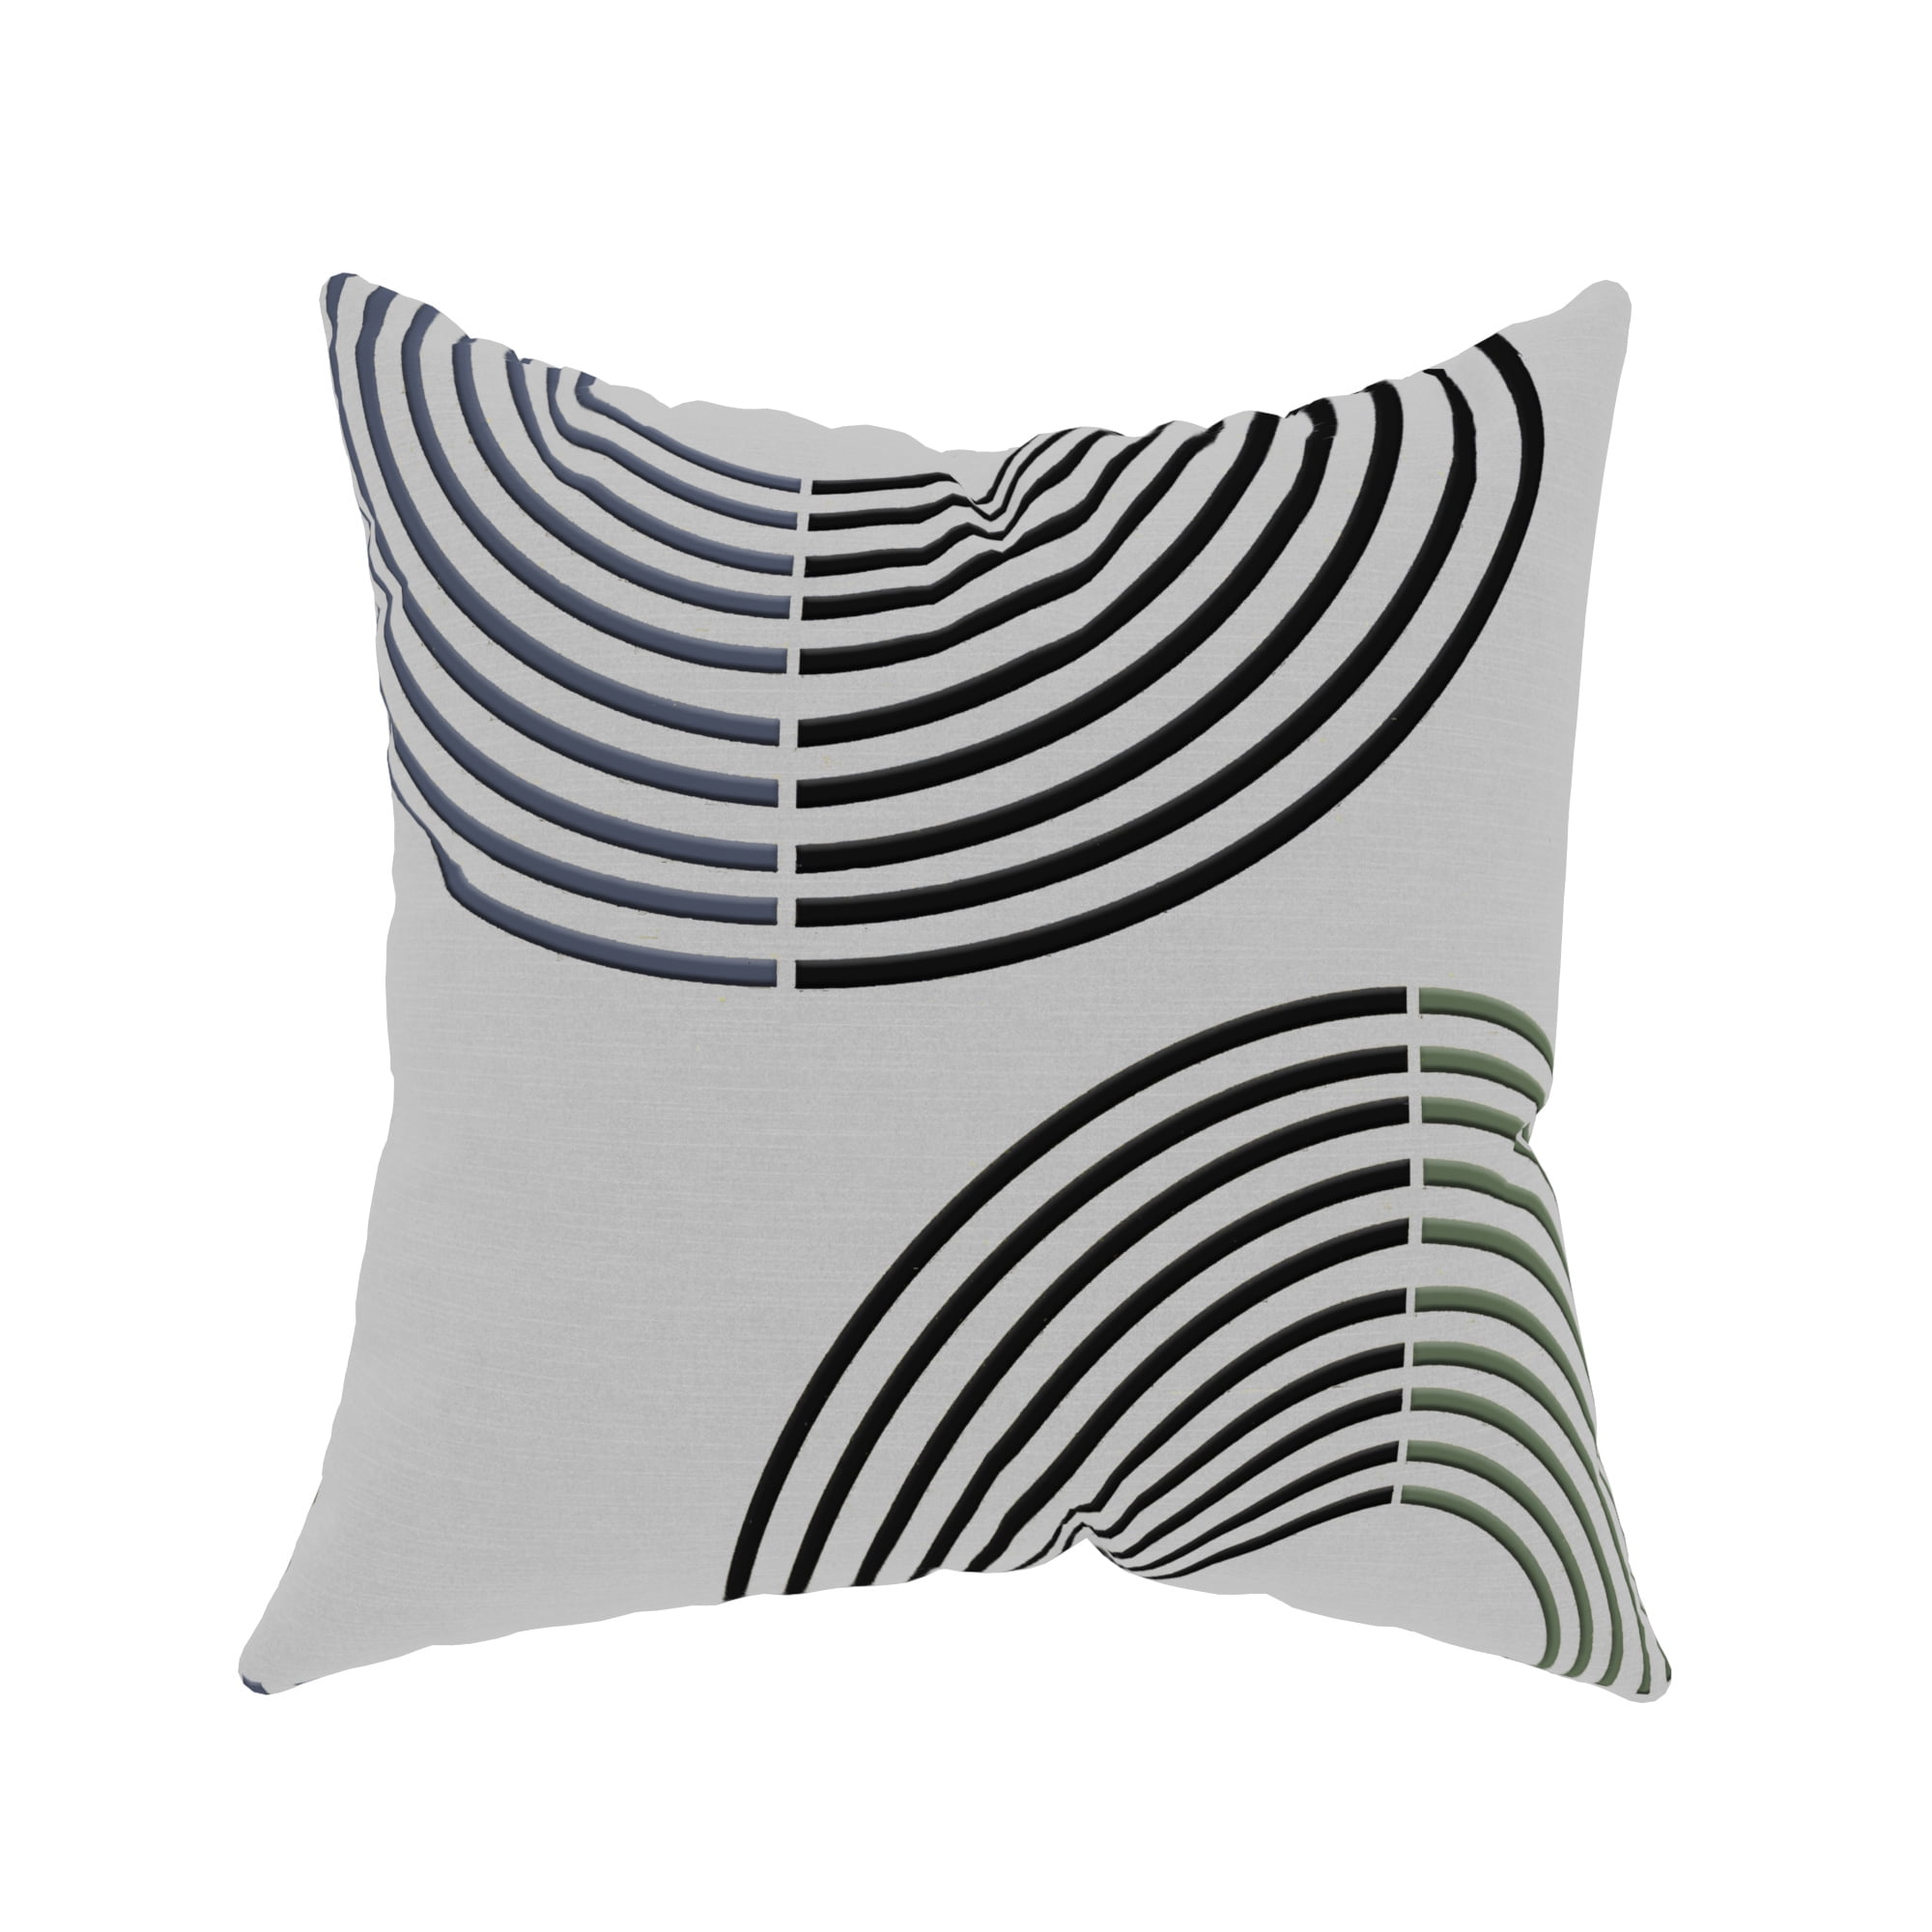 2 Pack Striped Pillow Covers Morden Simple Life Throw Pillowcases Cushion Covers 